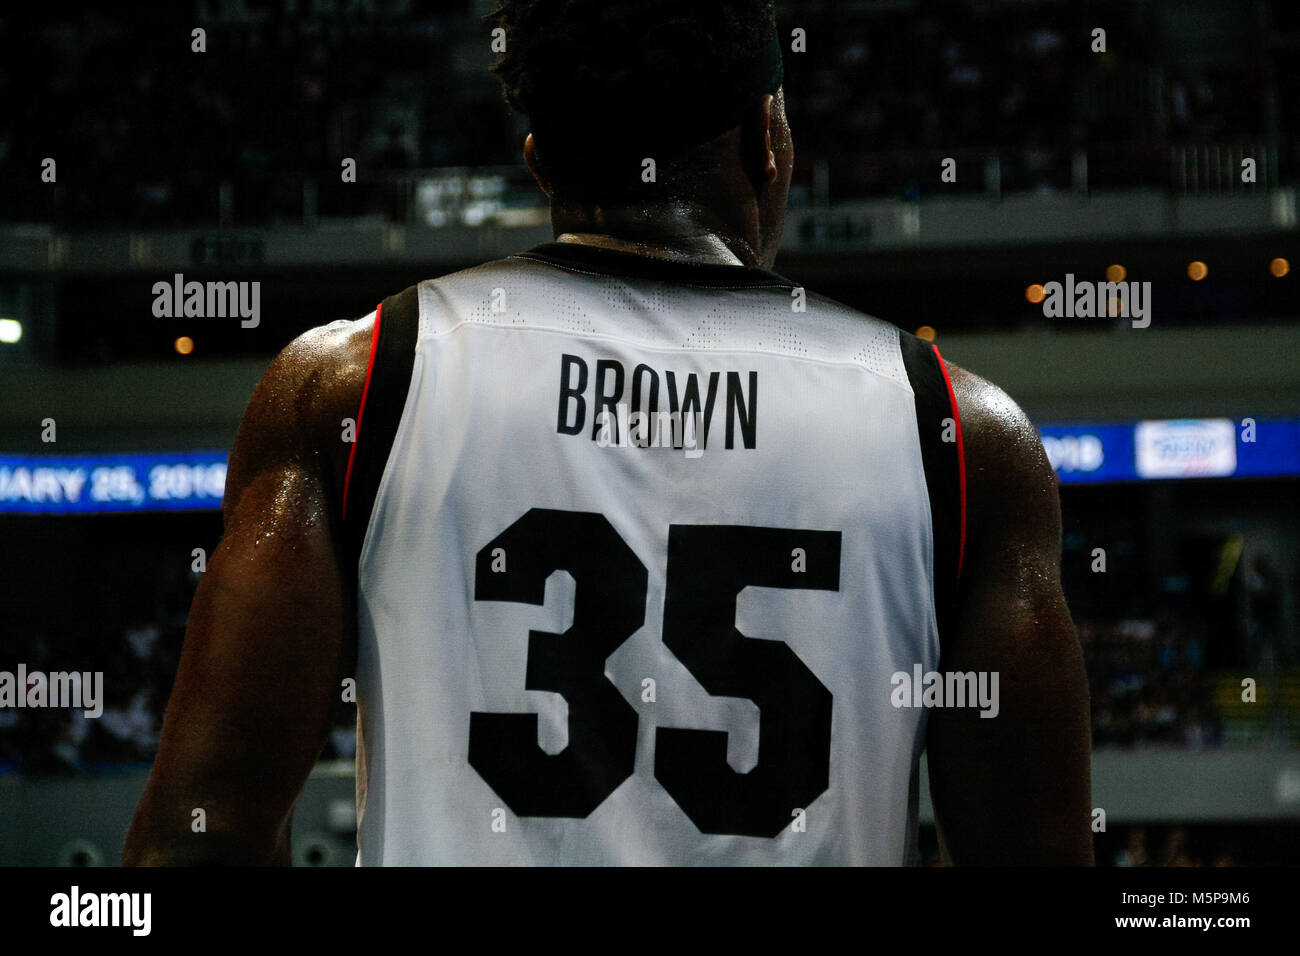 Philippines. 25th Feb, 2018. Ira Brown (35) of team Japan looks on during the qualifying game at the MOA Arena. The Philippine and Japanese basketball team met at the hardcourt of the Mall of Asia Arena in Pasay City, for the FIBA World Cup 2019 Asian Qualifiers. The Philippines won over Japan, 89-84. Credit: J Gerard Seguia/ZUMA Wire/Alamy Live News Stock Photo